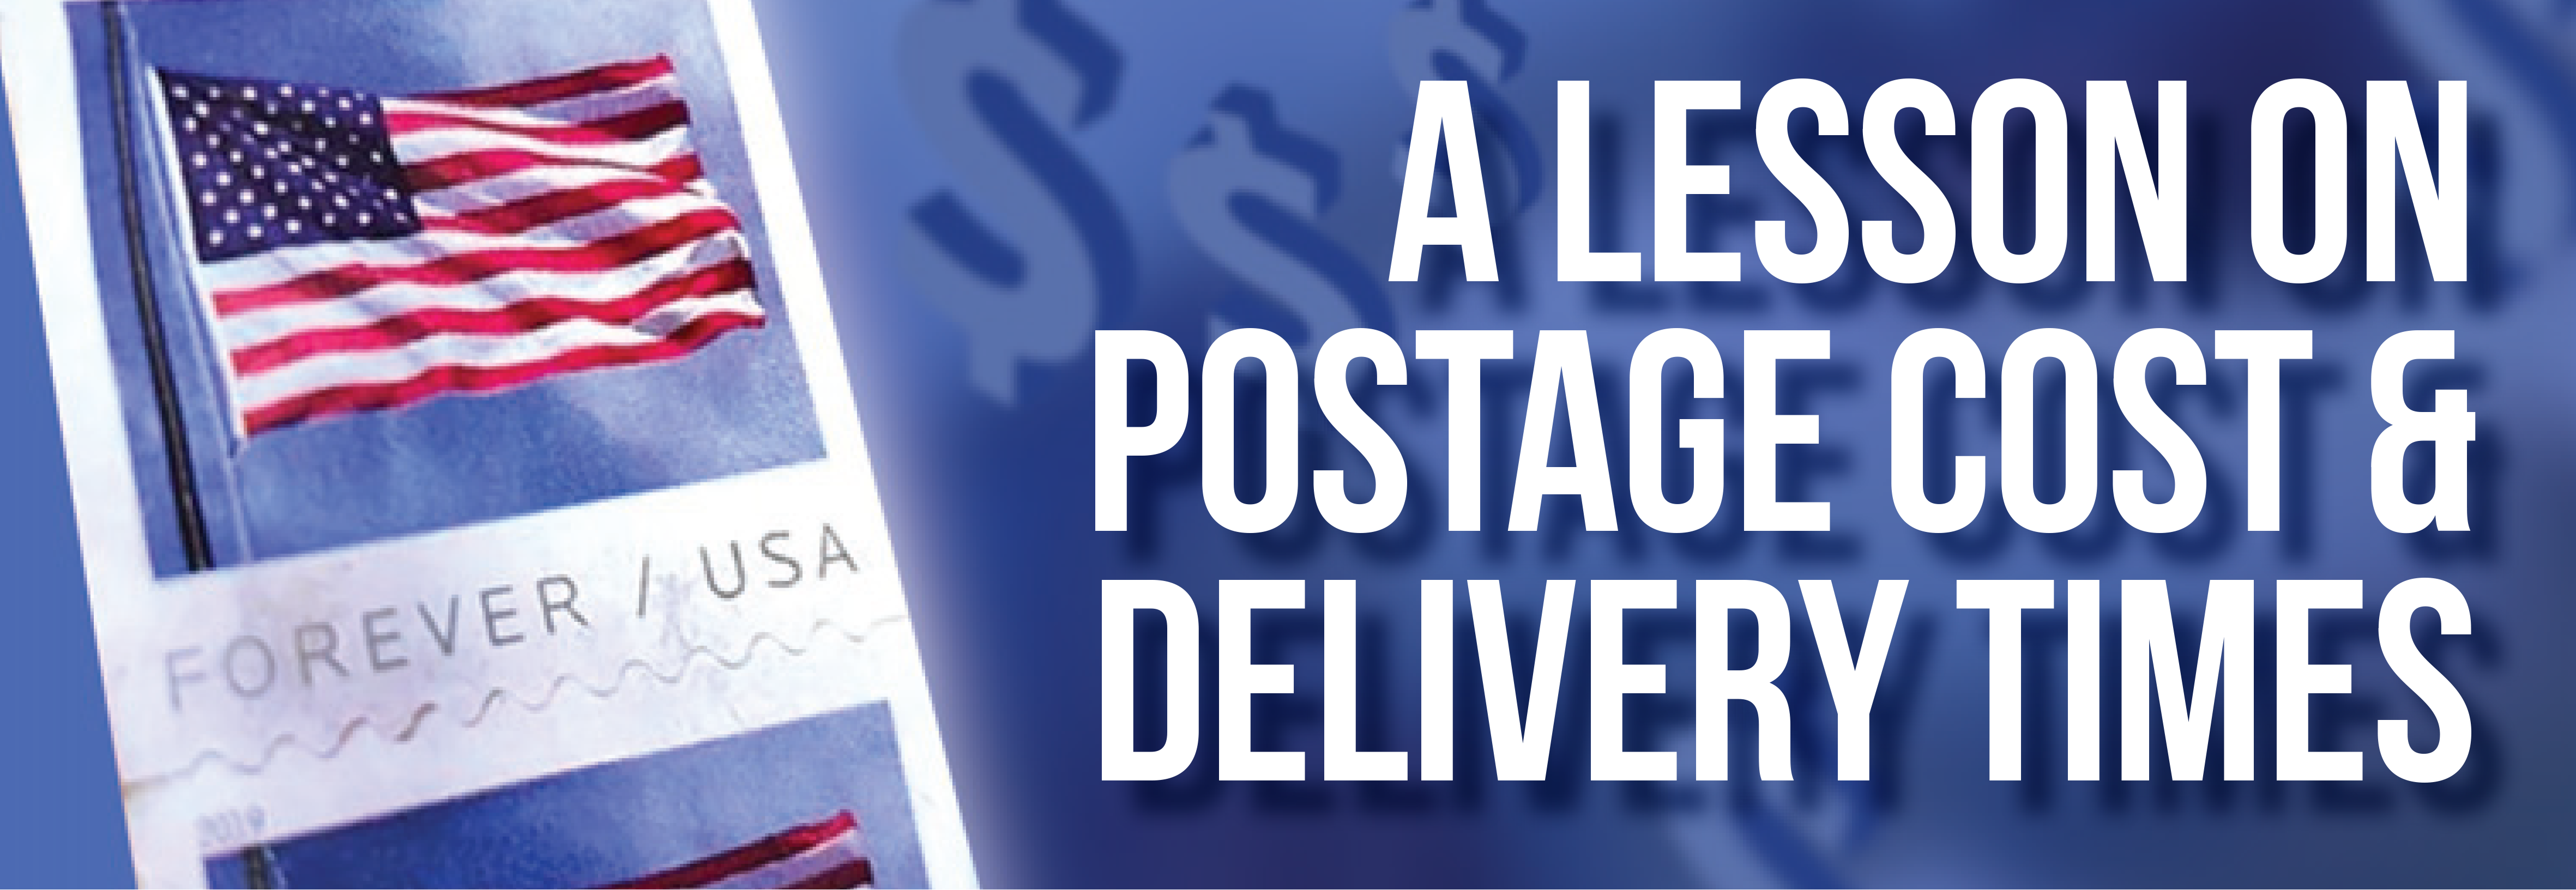 1 A Lesson On Postage Cost & Delivery Times